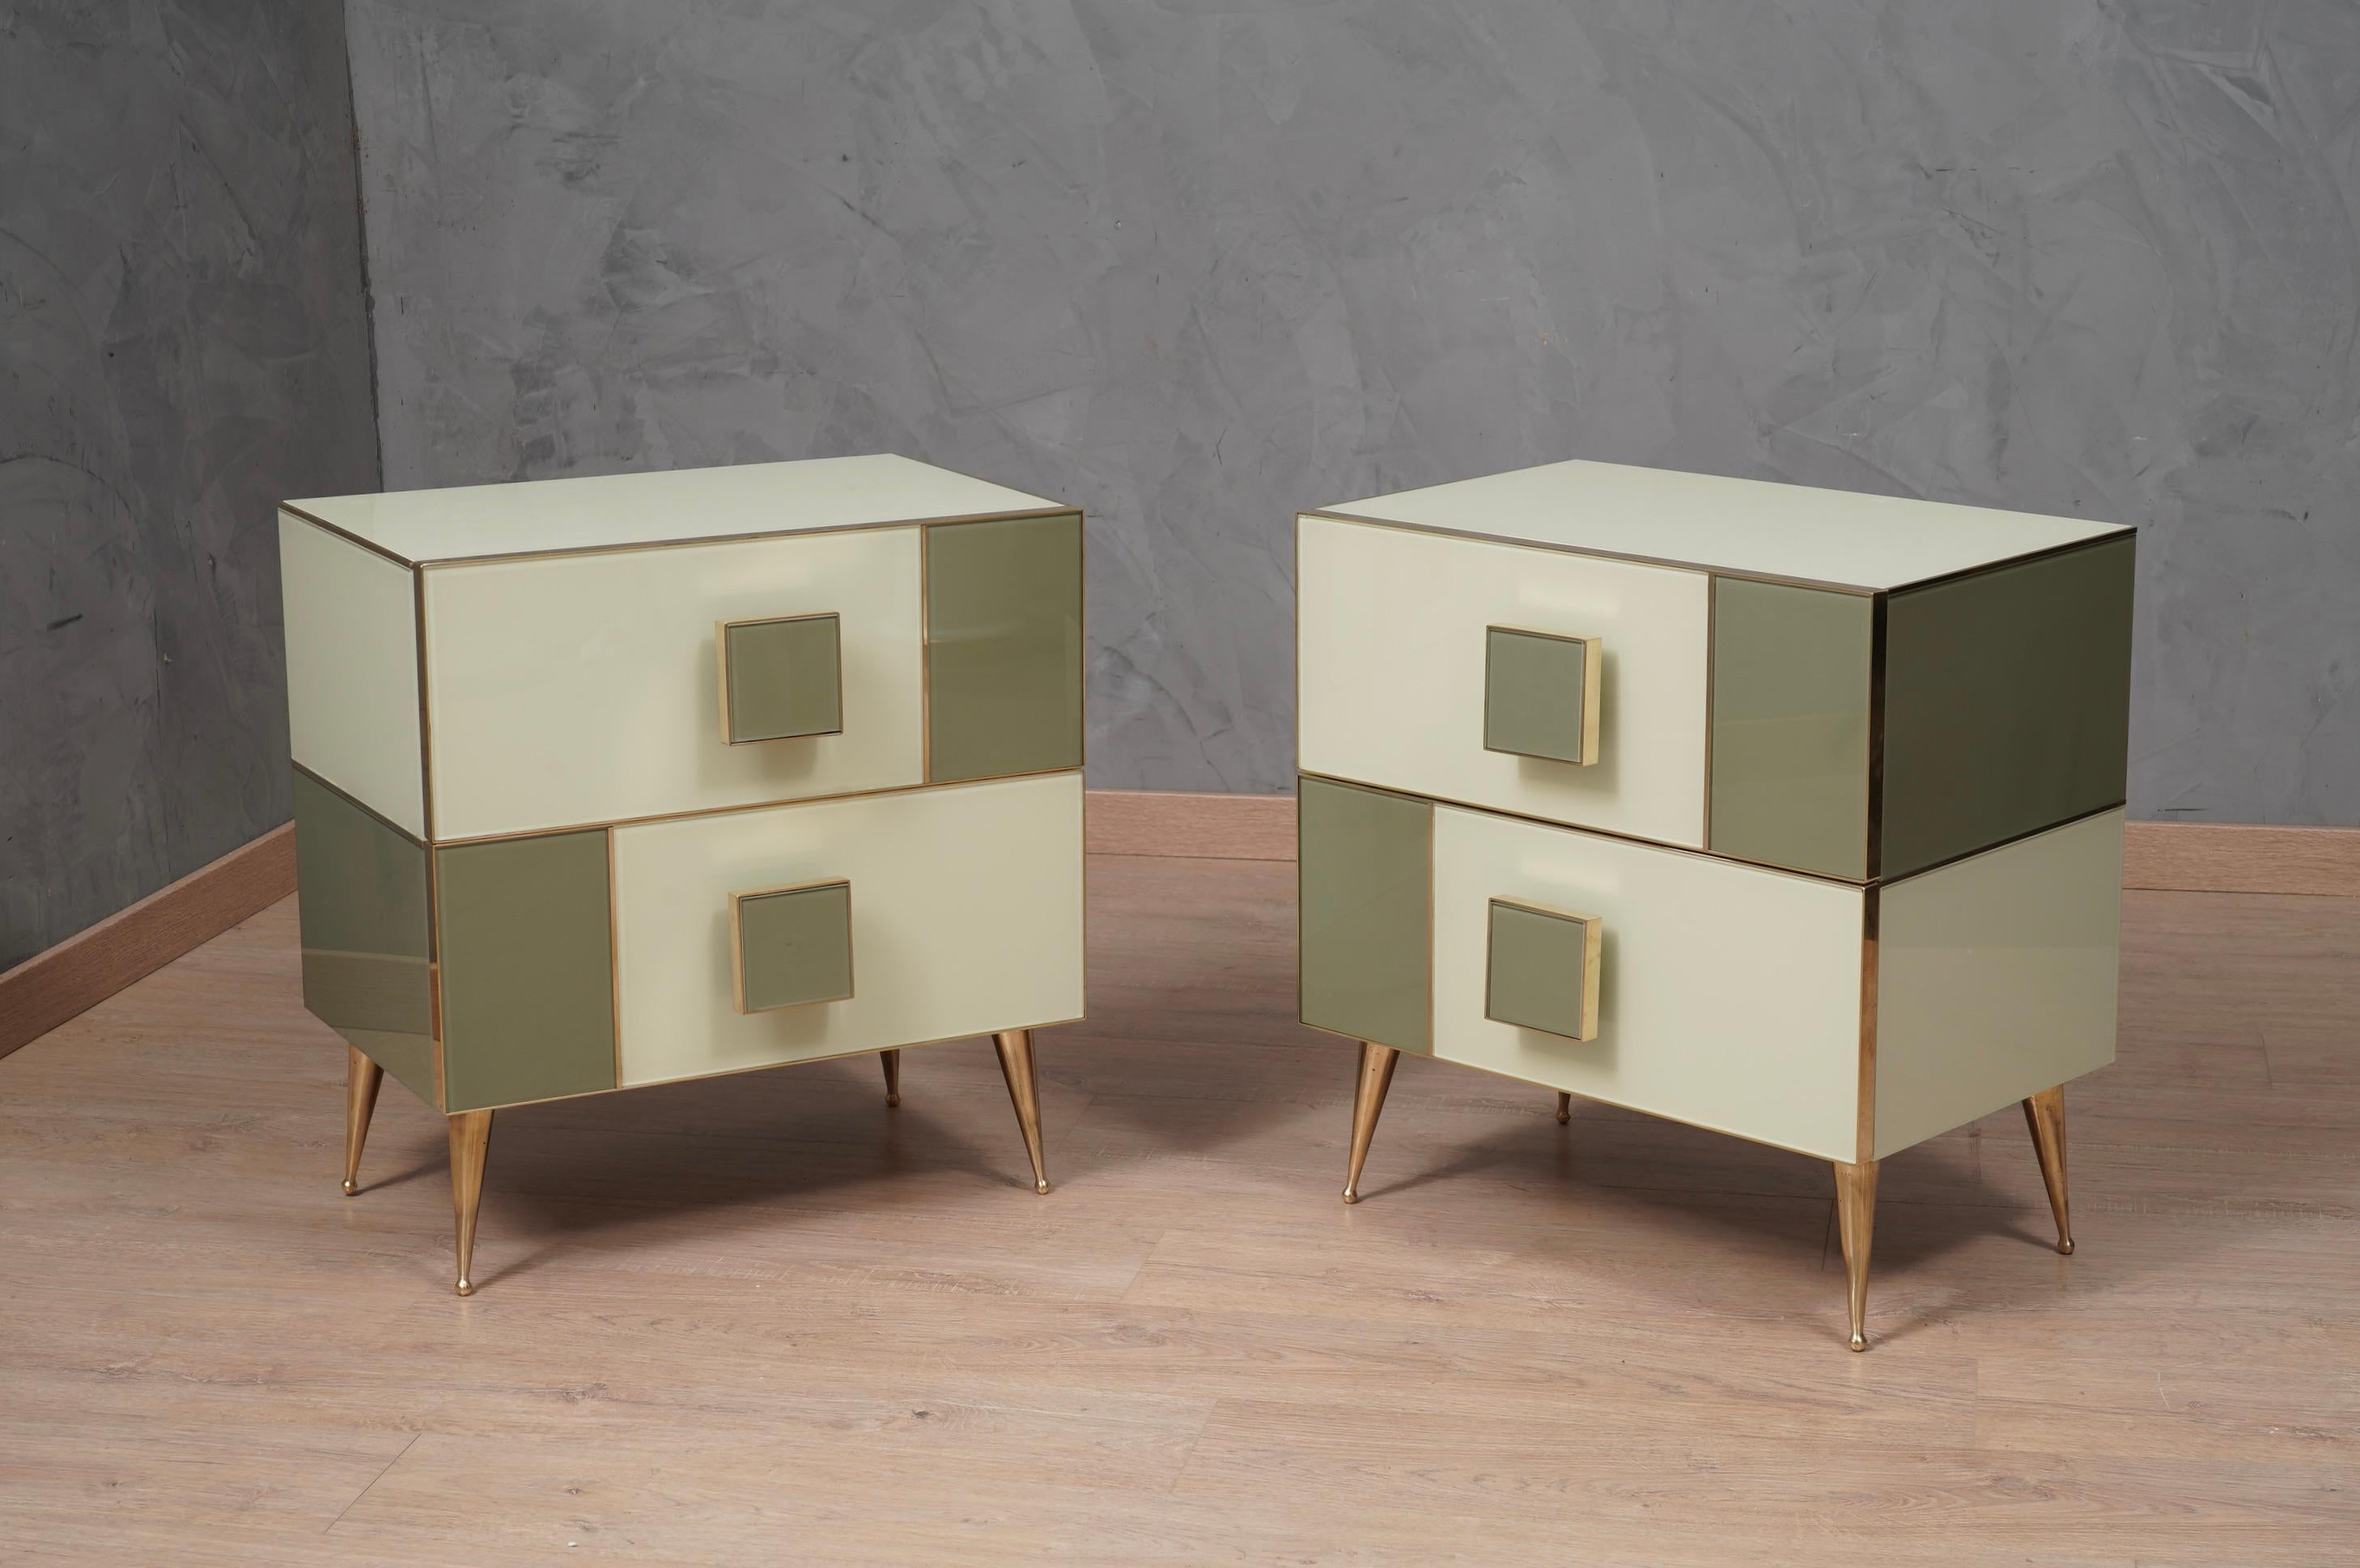 Classic design for a pair of night tables all in dove gray and cream colored glass and brass. Square and linear as in the style of that design.

The bedside tables have a wooden structure, above they have been covered with dove gray and cream